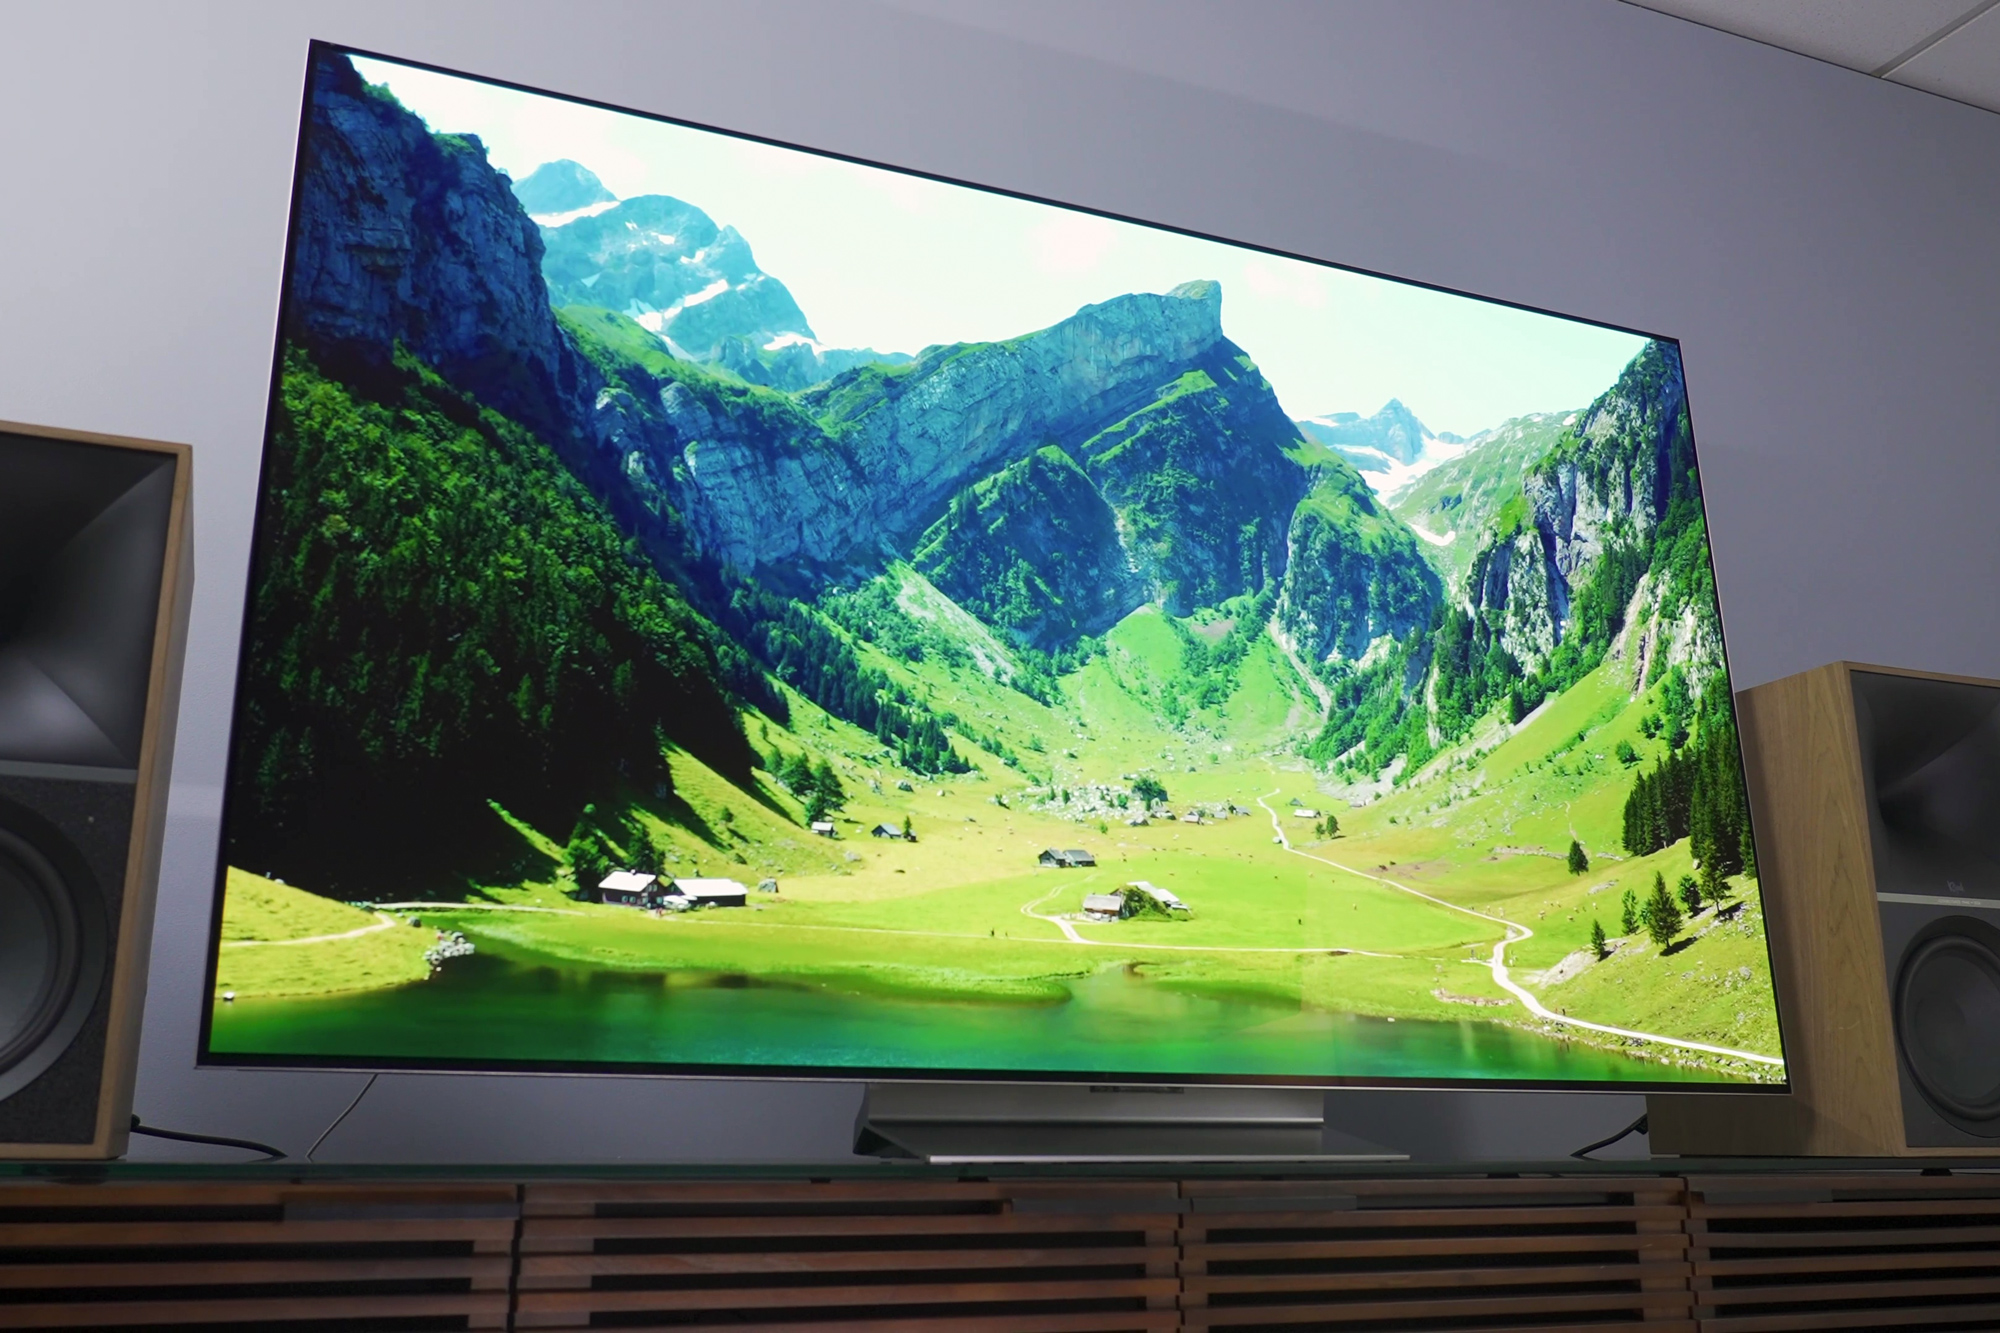 I test TVs for a living, and this is the one I'd buy with my own money